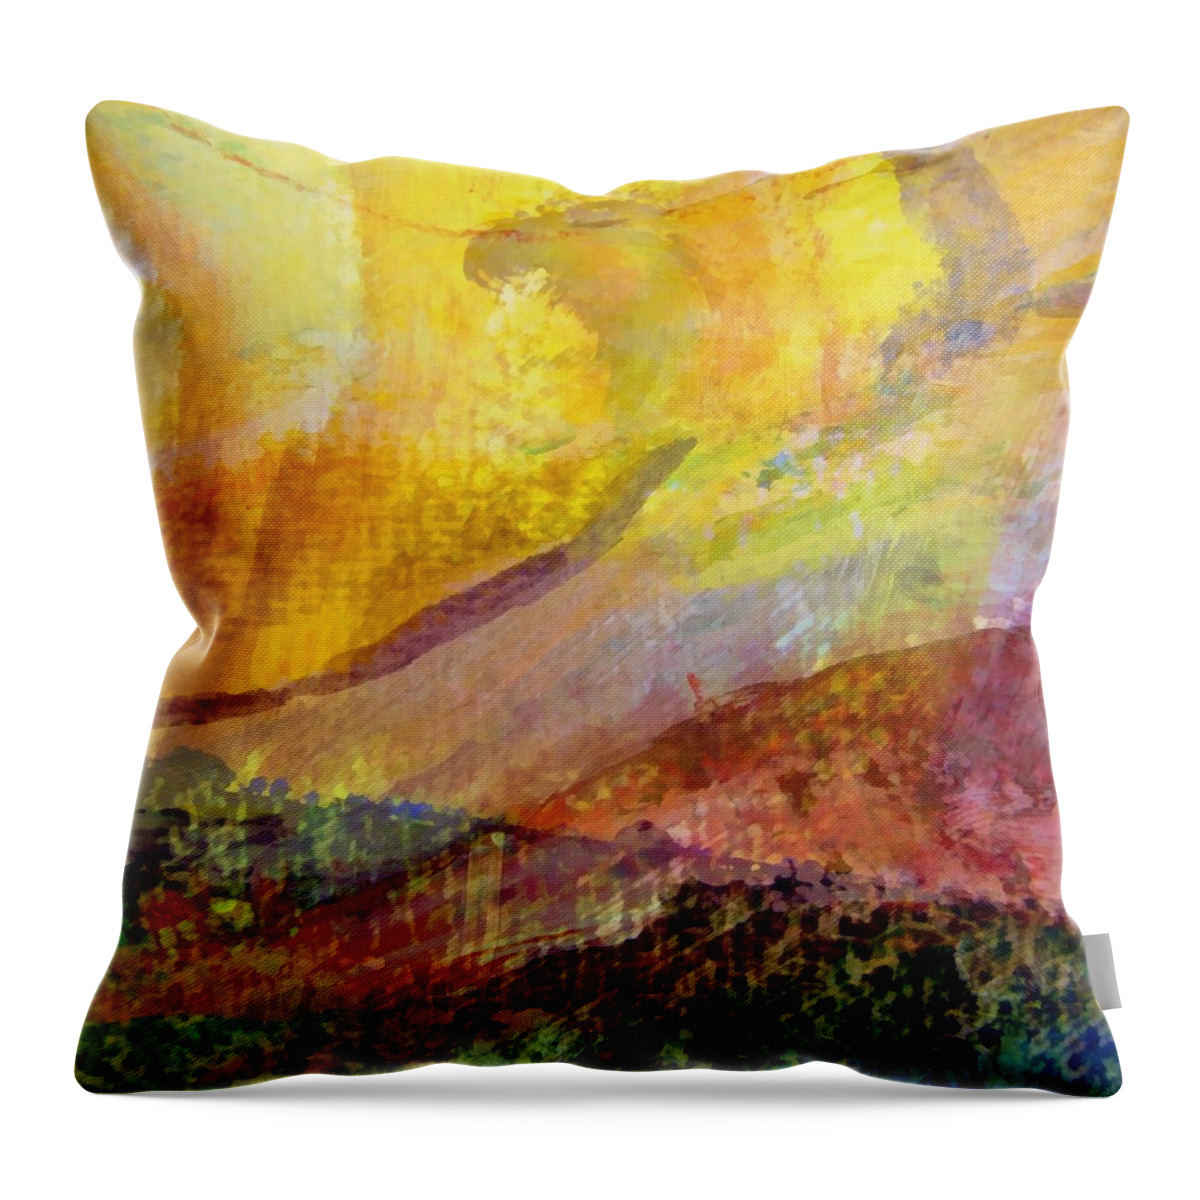 Abstract Collage Throw Pillow featuring the painting Abstract No. 3 by Michelle Calkins